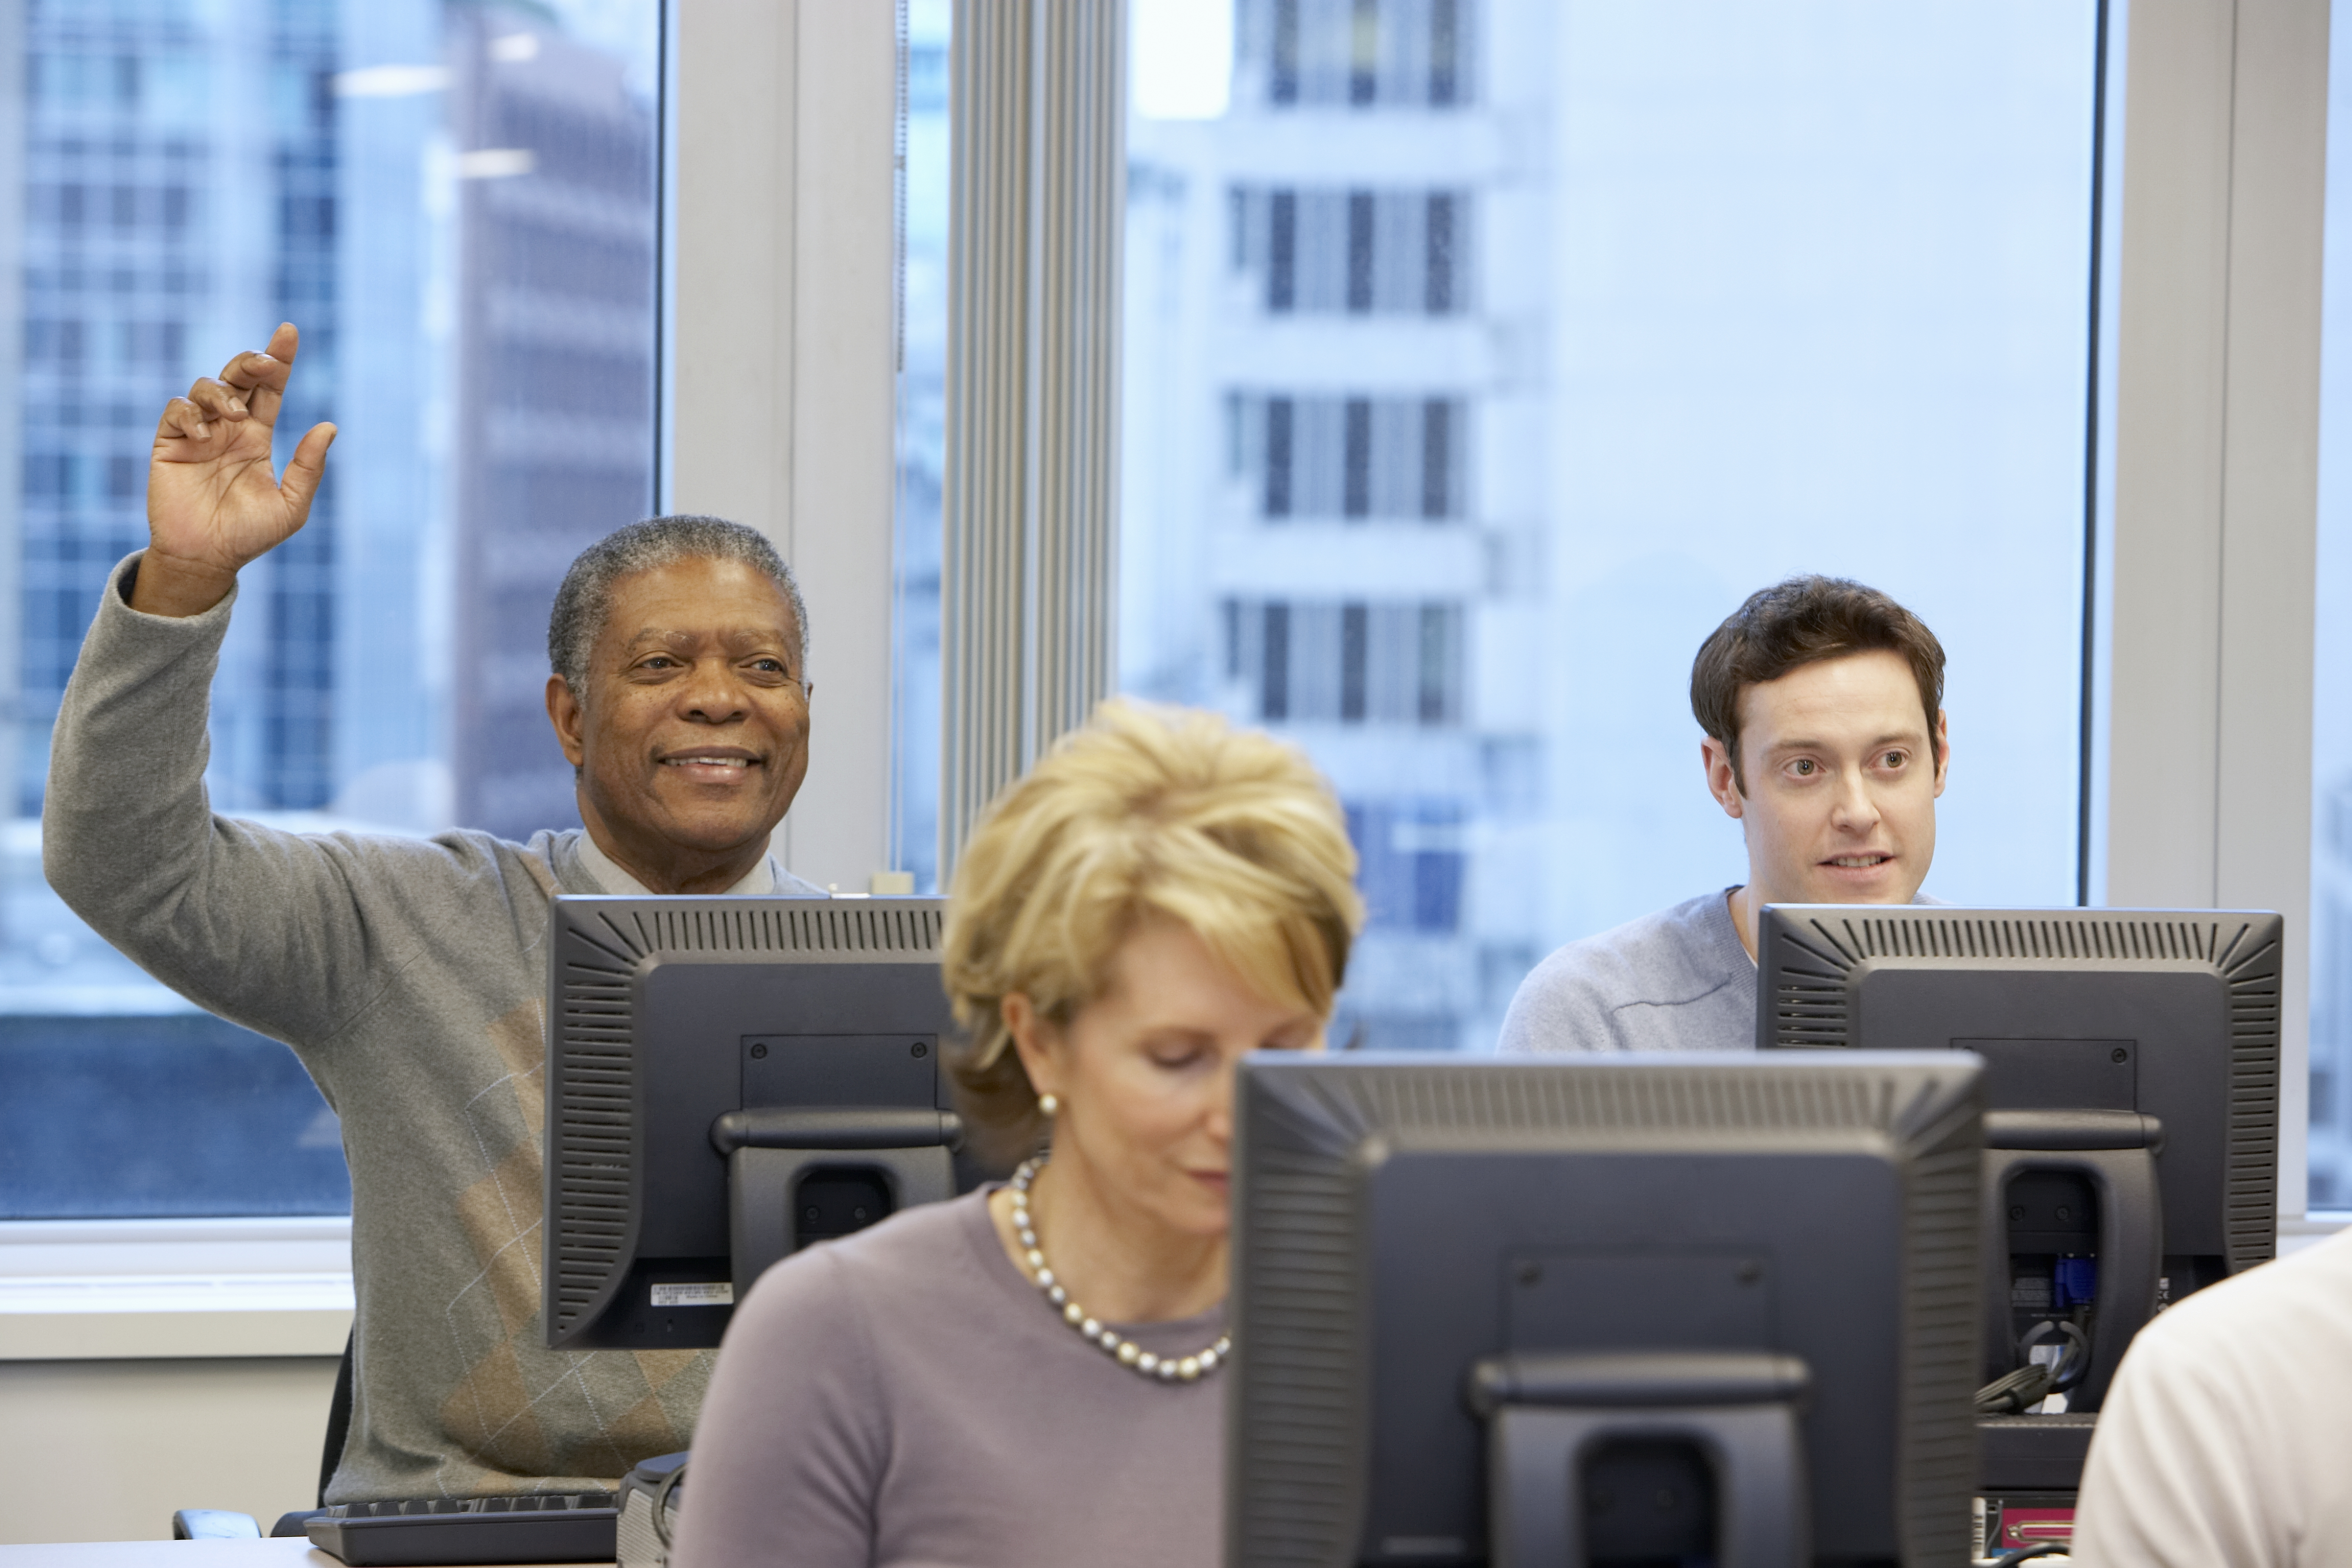 Group of people sitting at computers in office, one raising hand, front view